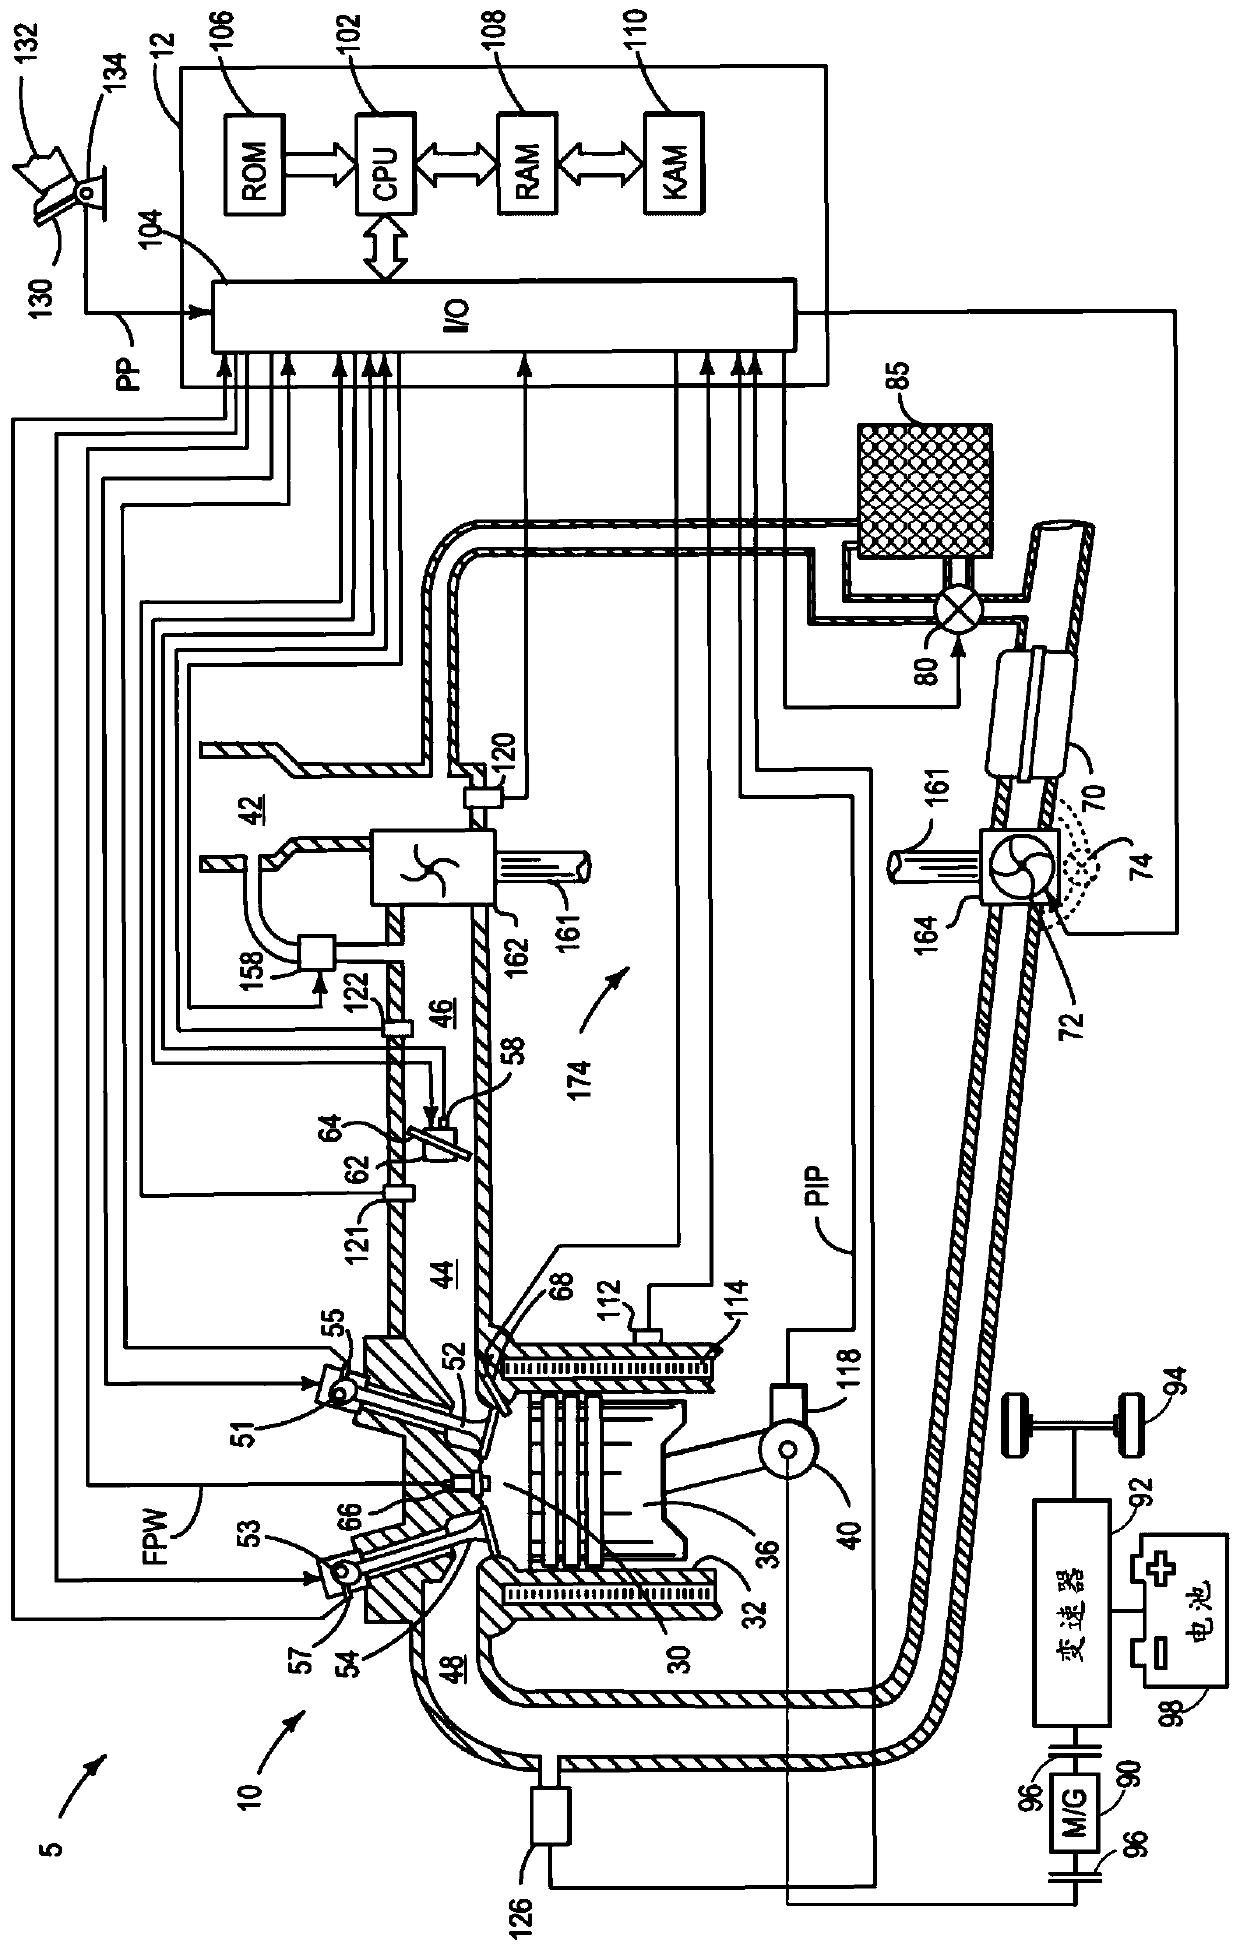 Electrically-assisted engine braking